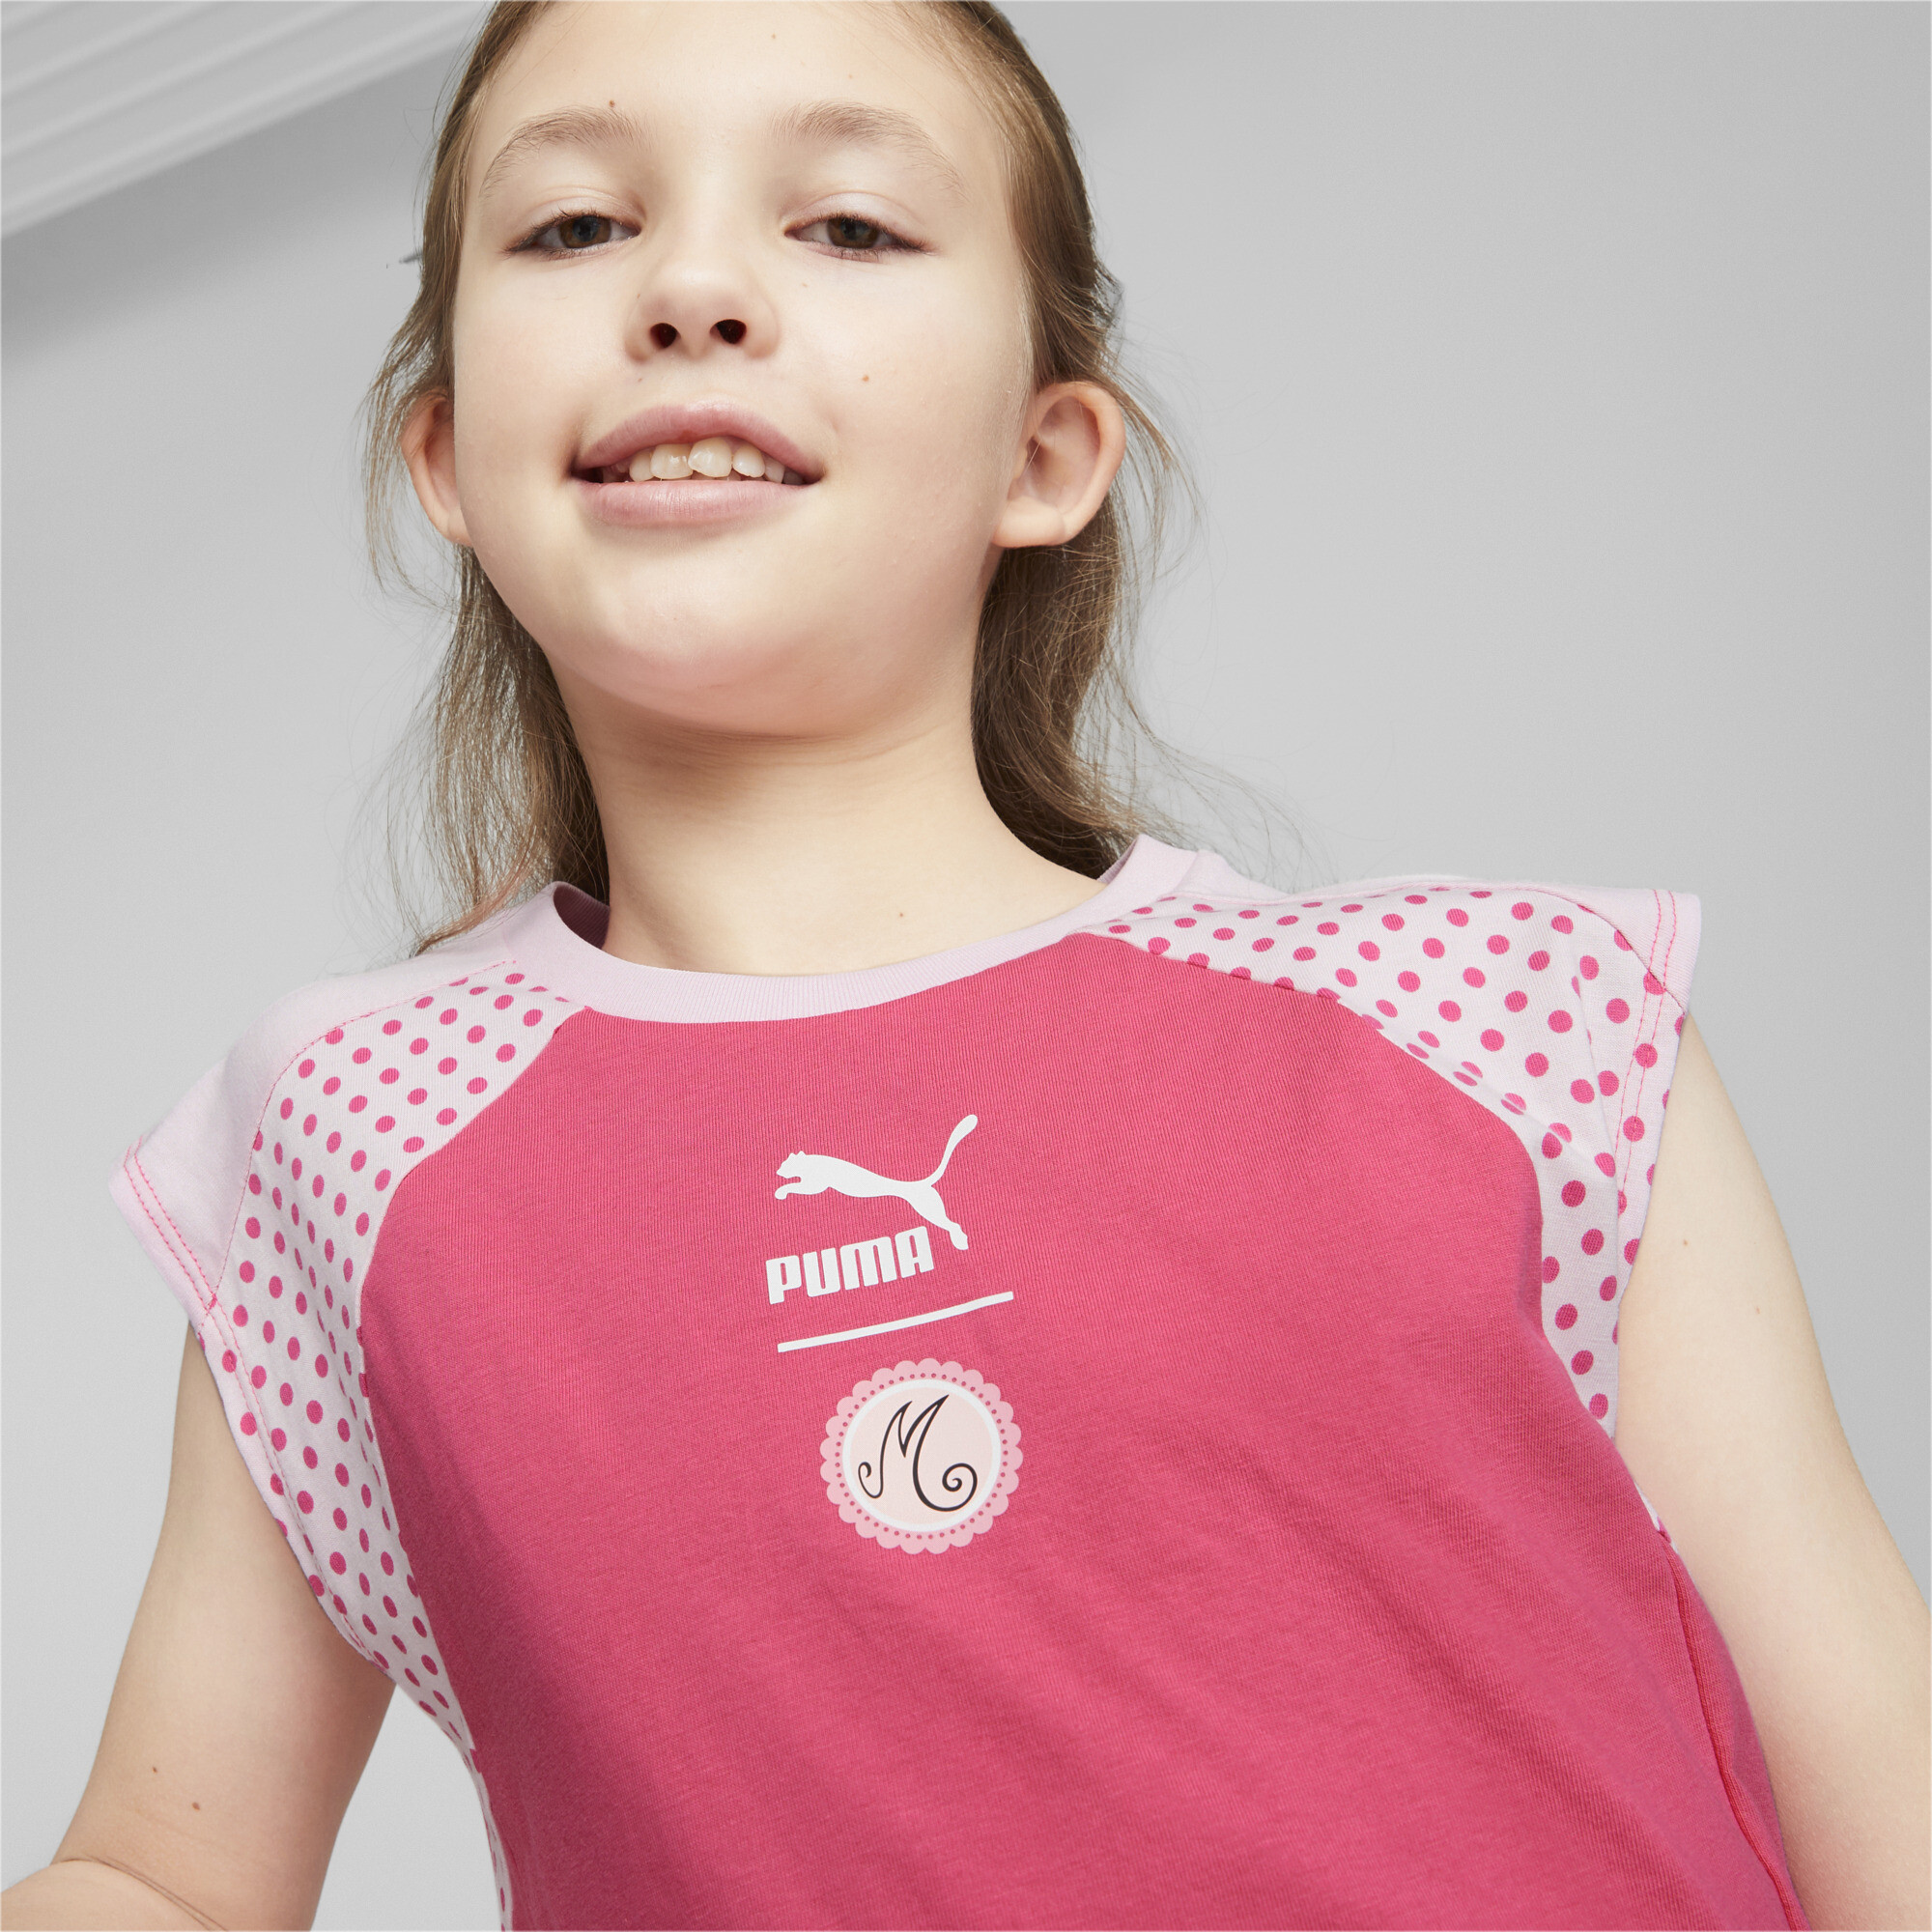 Puma X MIRACULOUS SL Tee Youth, Pink, Size 7-8Y, Clothing